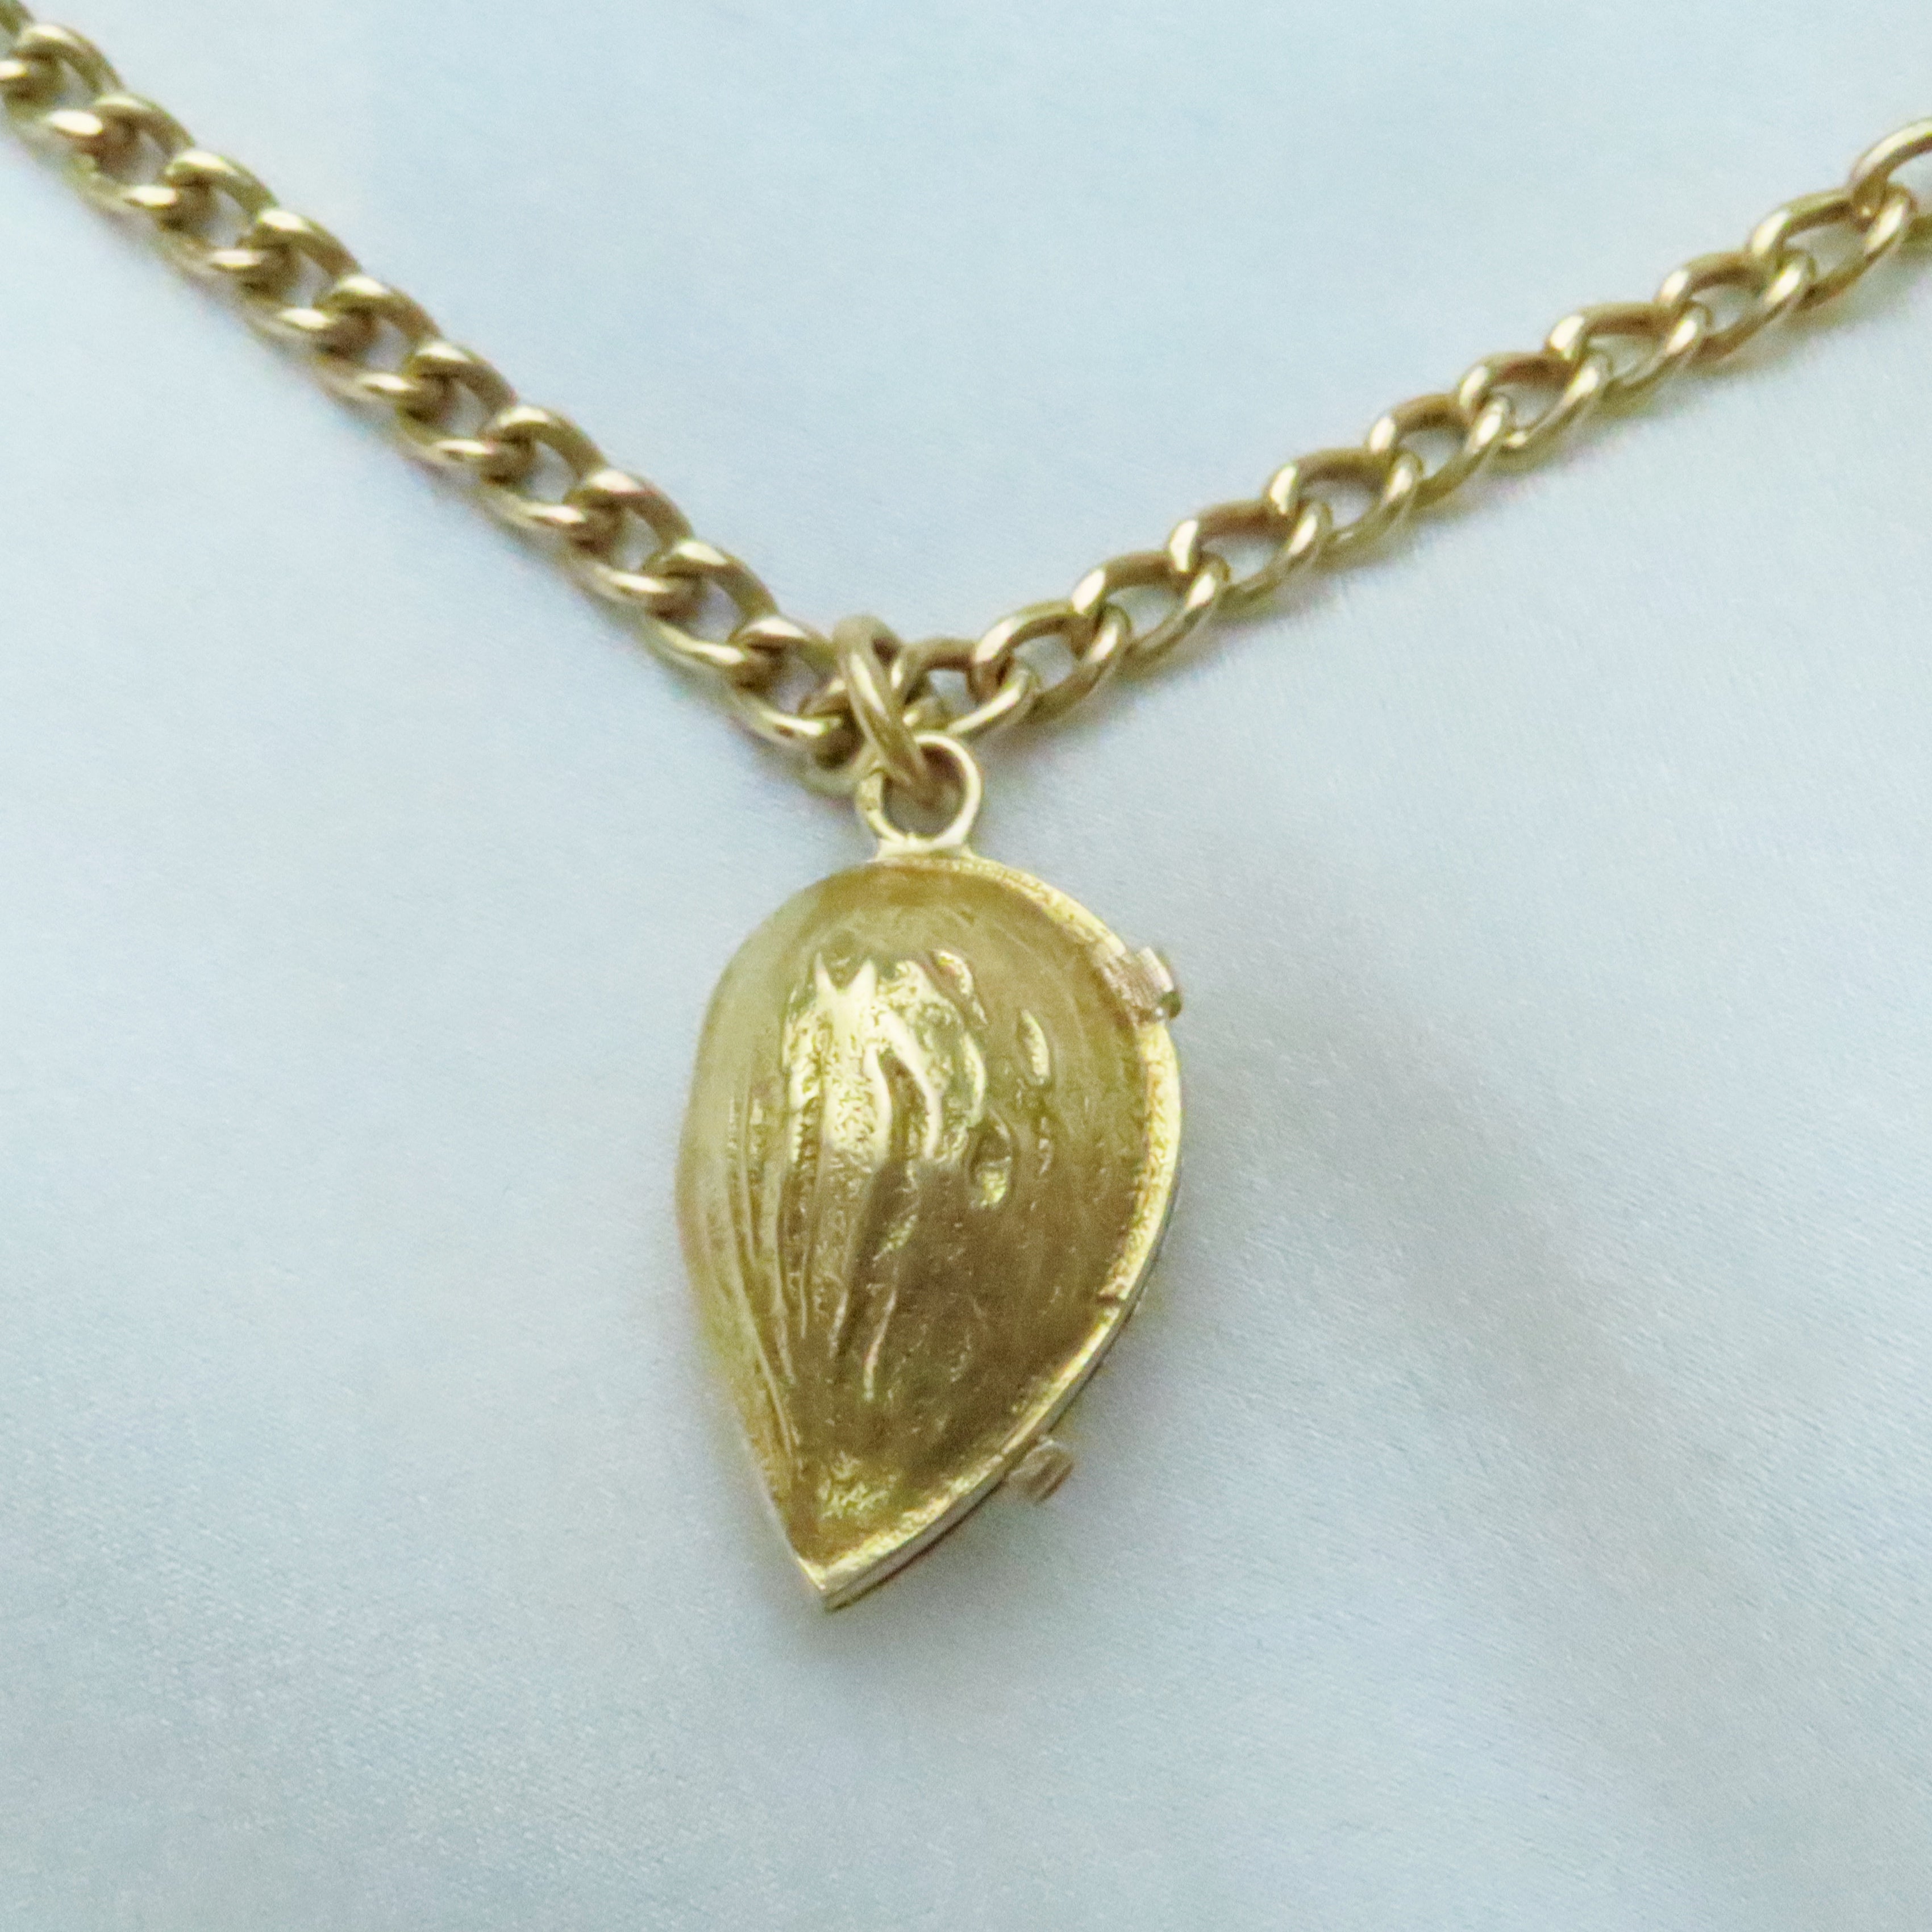 18ct almond pendant / charm with nuts inside on chain (chain not included)